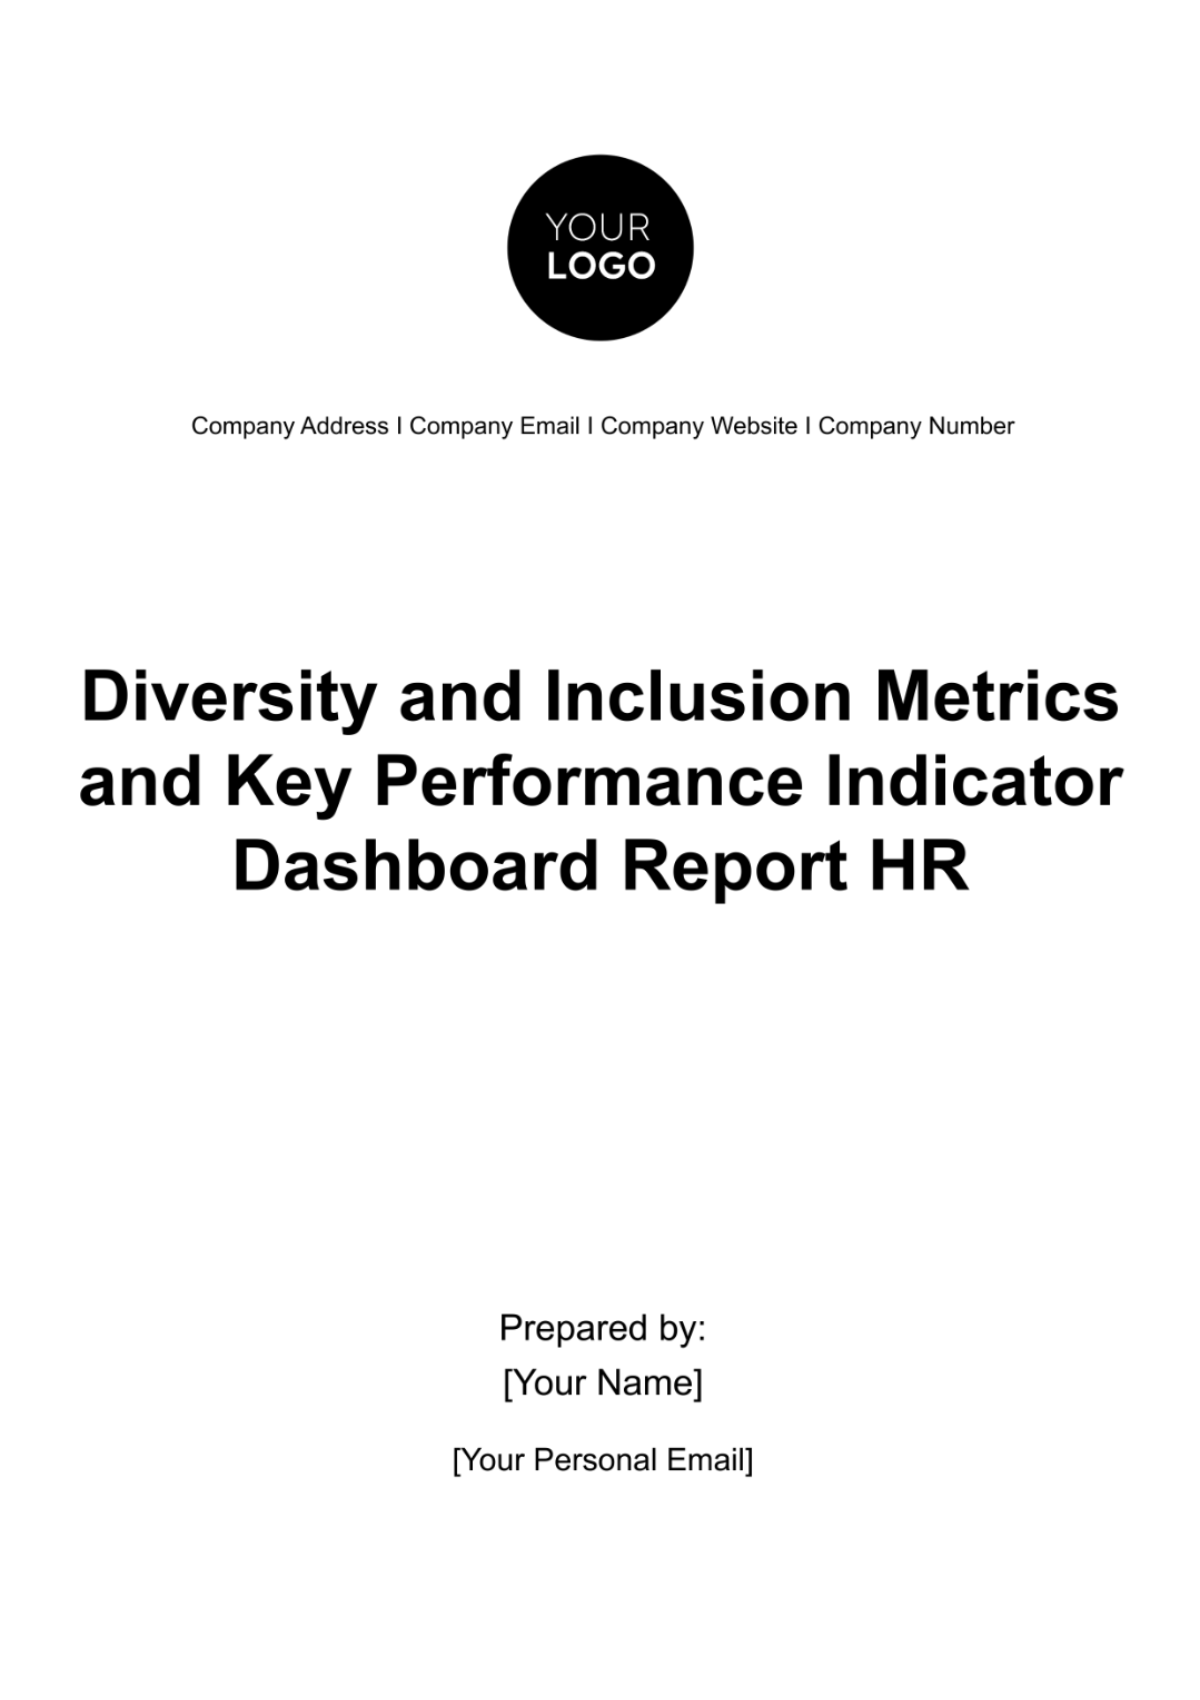 Diversity and Inclusion Metrics and Key Performance Indicator Dashboard Report HR Template